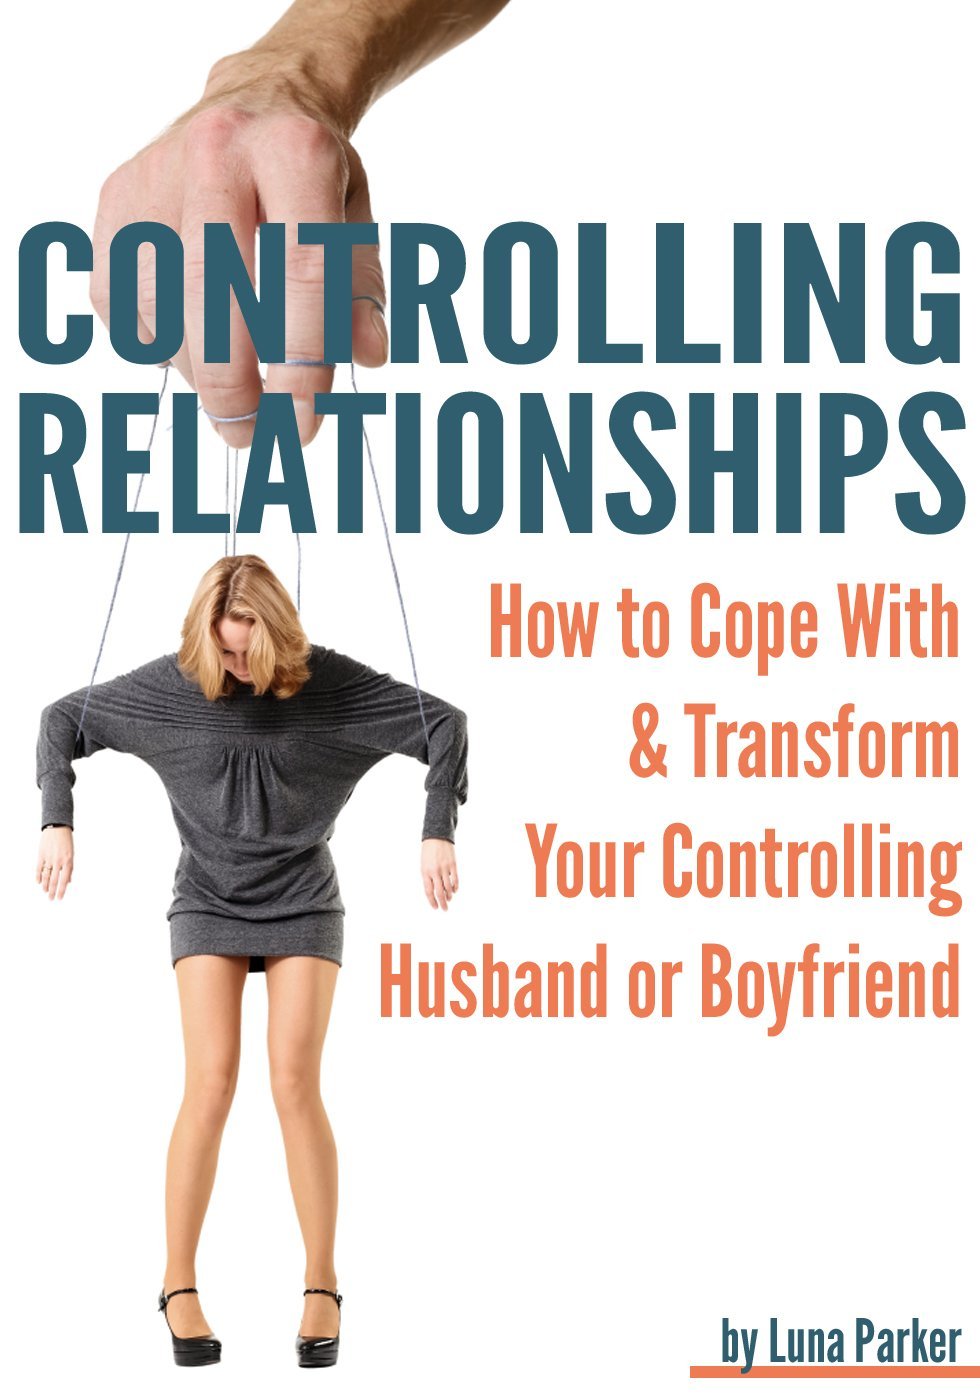 Controlling Relationships: How to Cope with and Transform your Controlling Husband or Boyfriend by Luna Parker